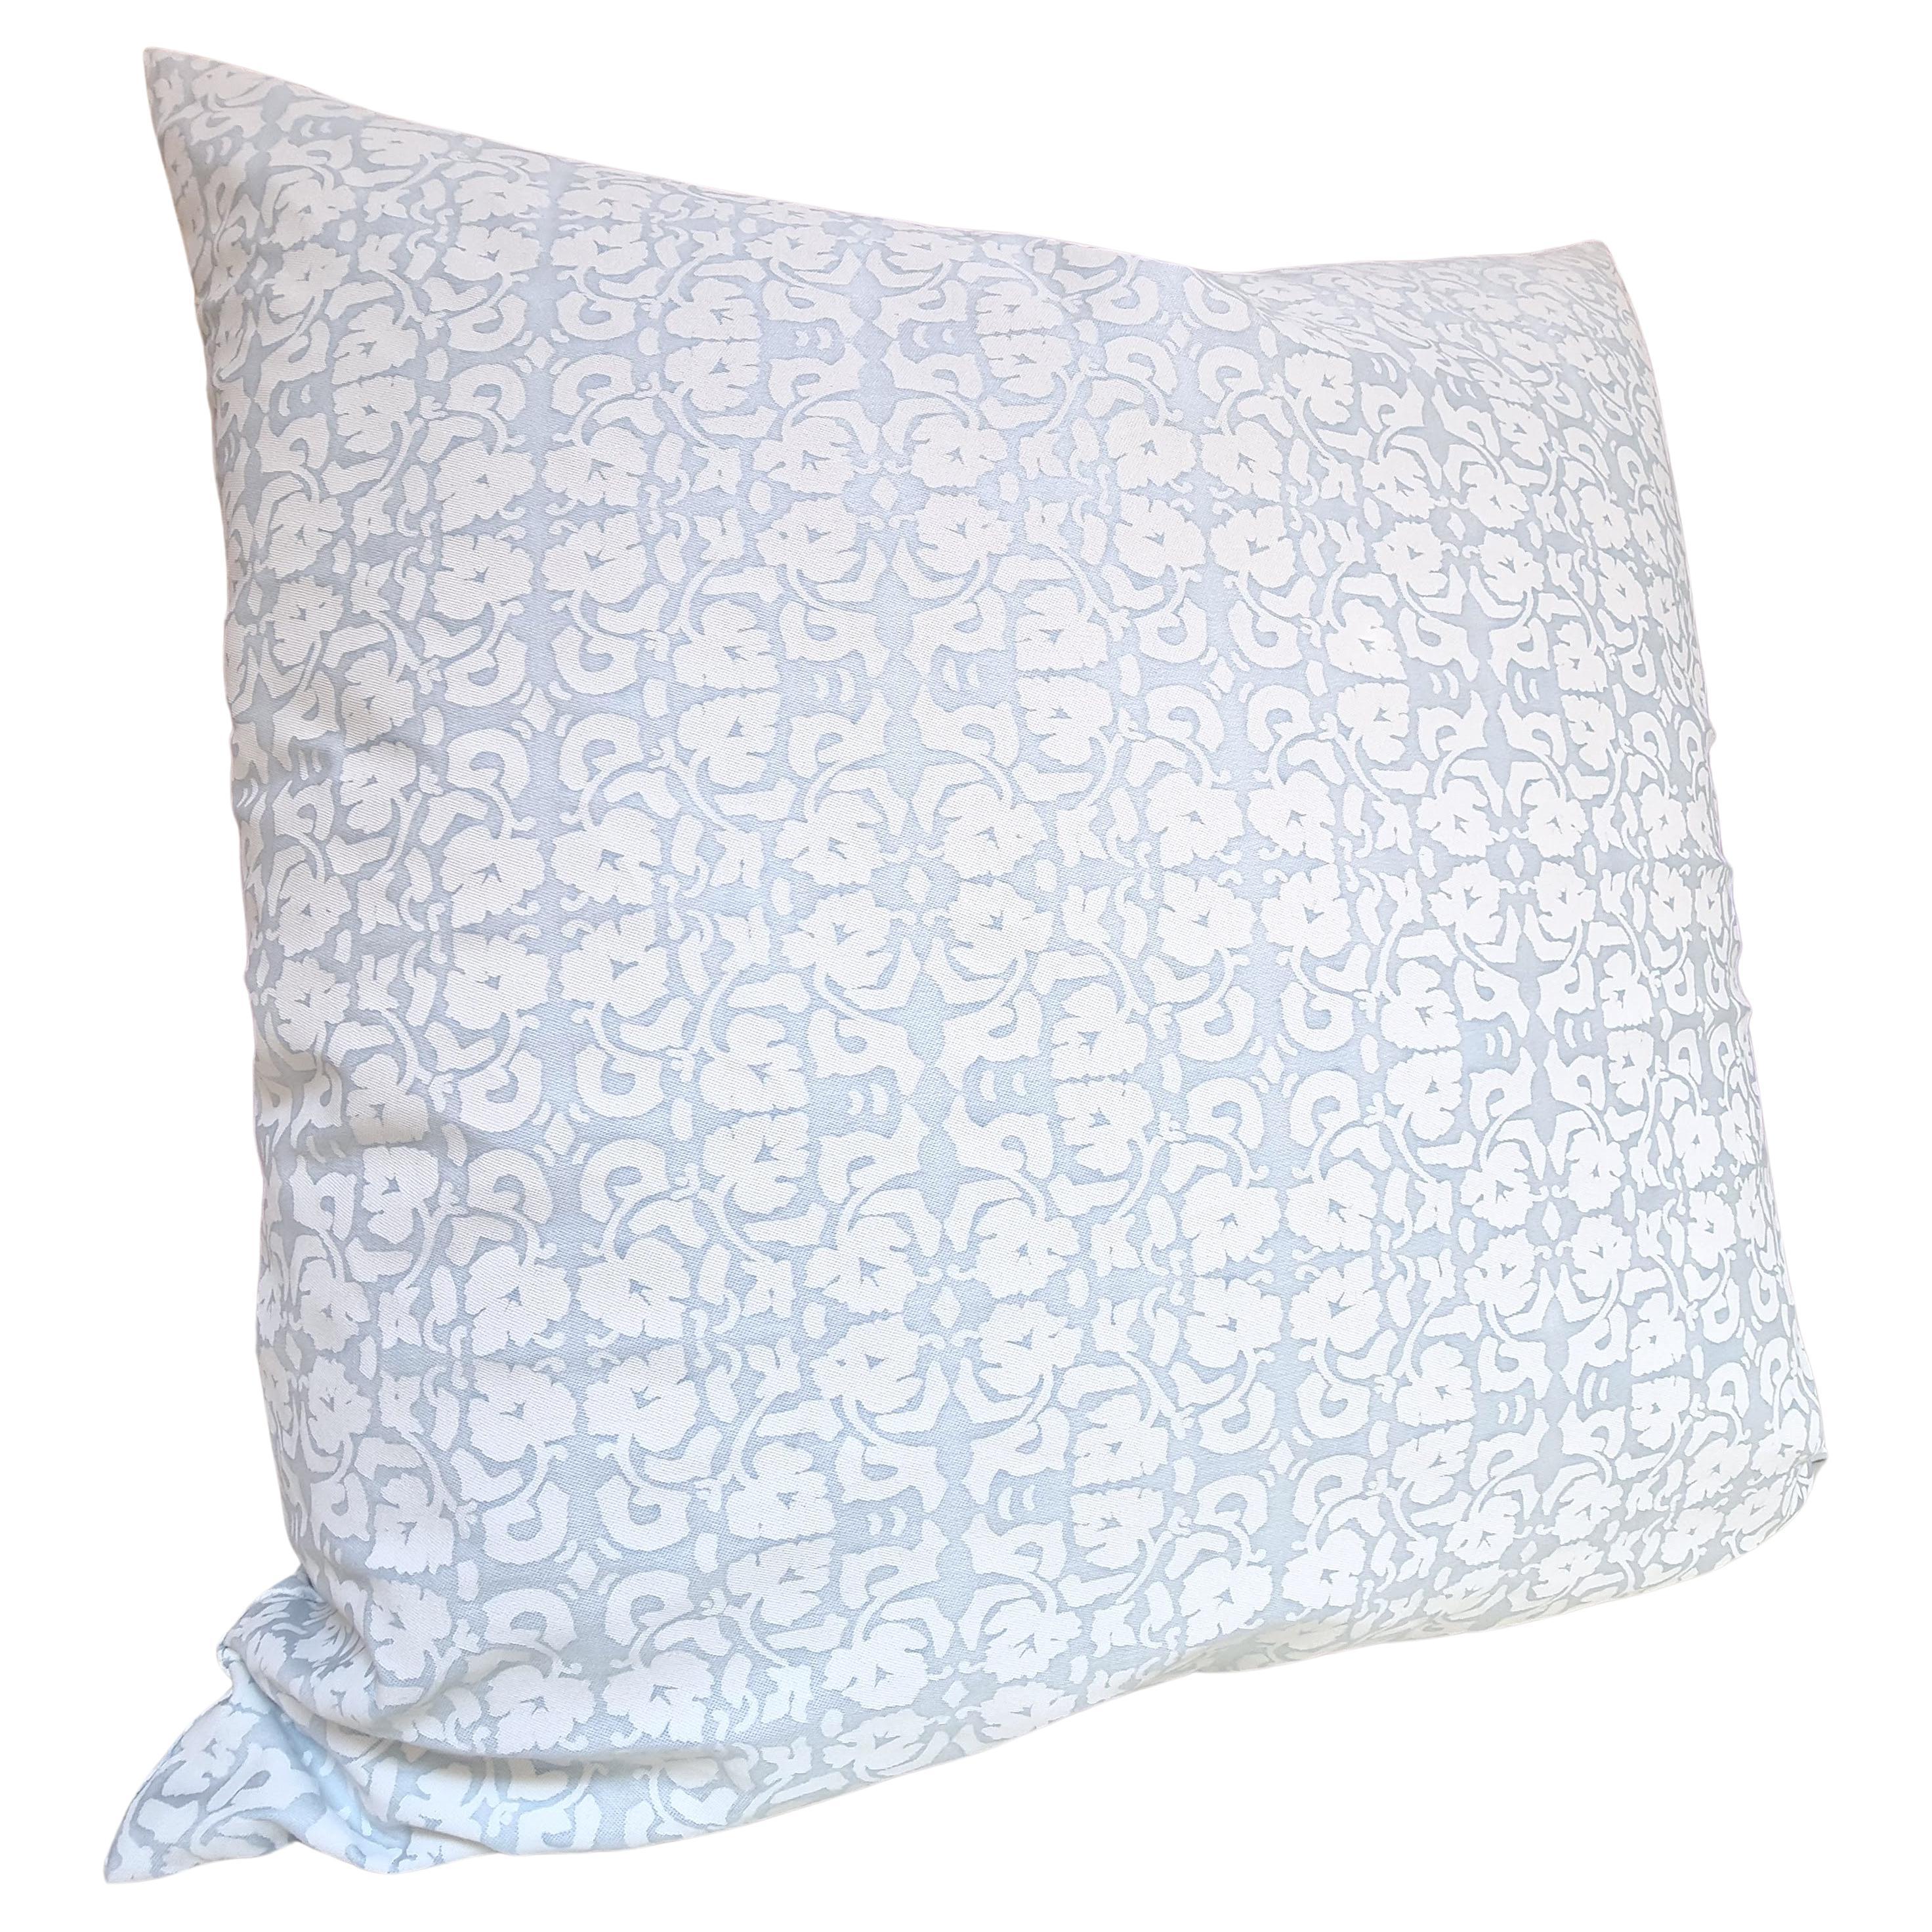 This amazing double-sided throw pillow is handmade using Fortuny fabric Shiraz pattern in powder blue & white color.
The pillow cover is fully lined, there is an invisible zipper closure at the bottom for easy removal and an insert filled with a